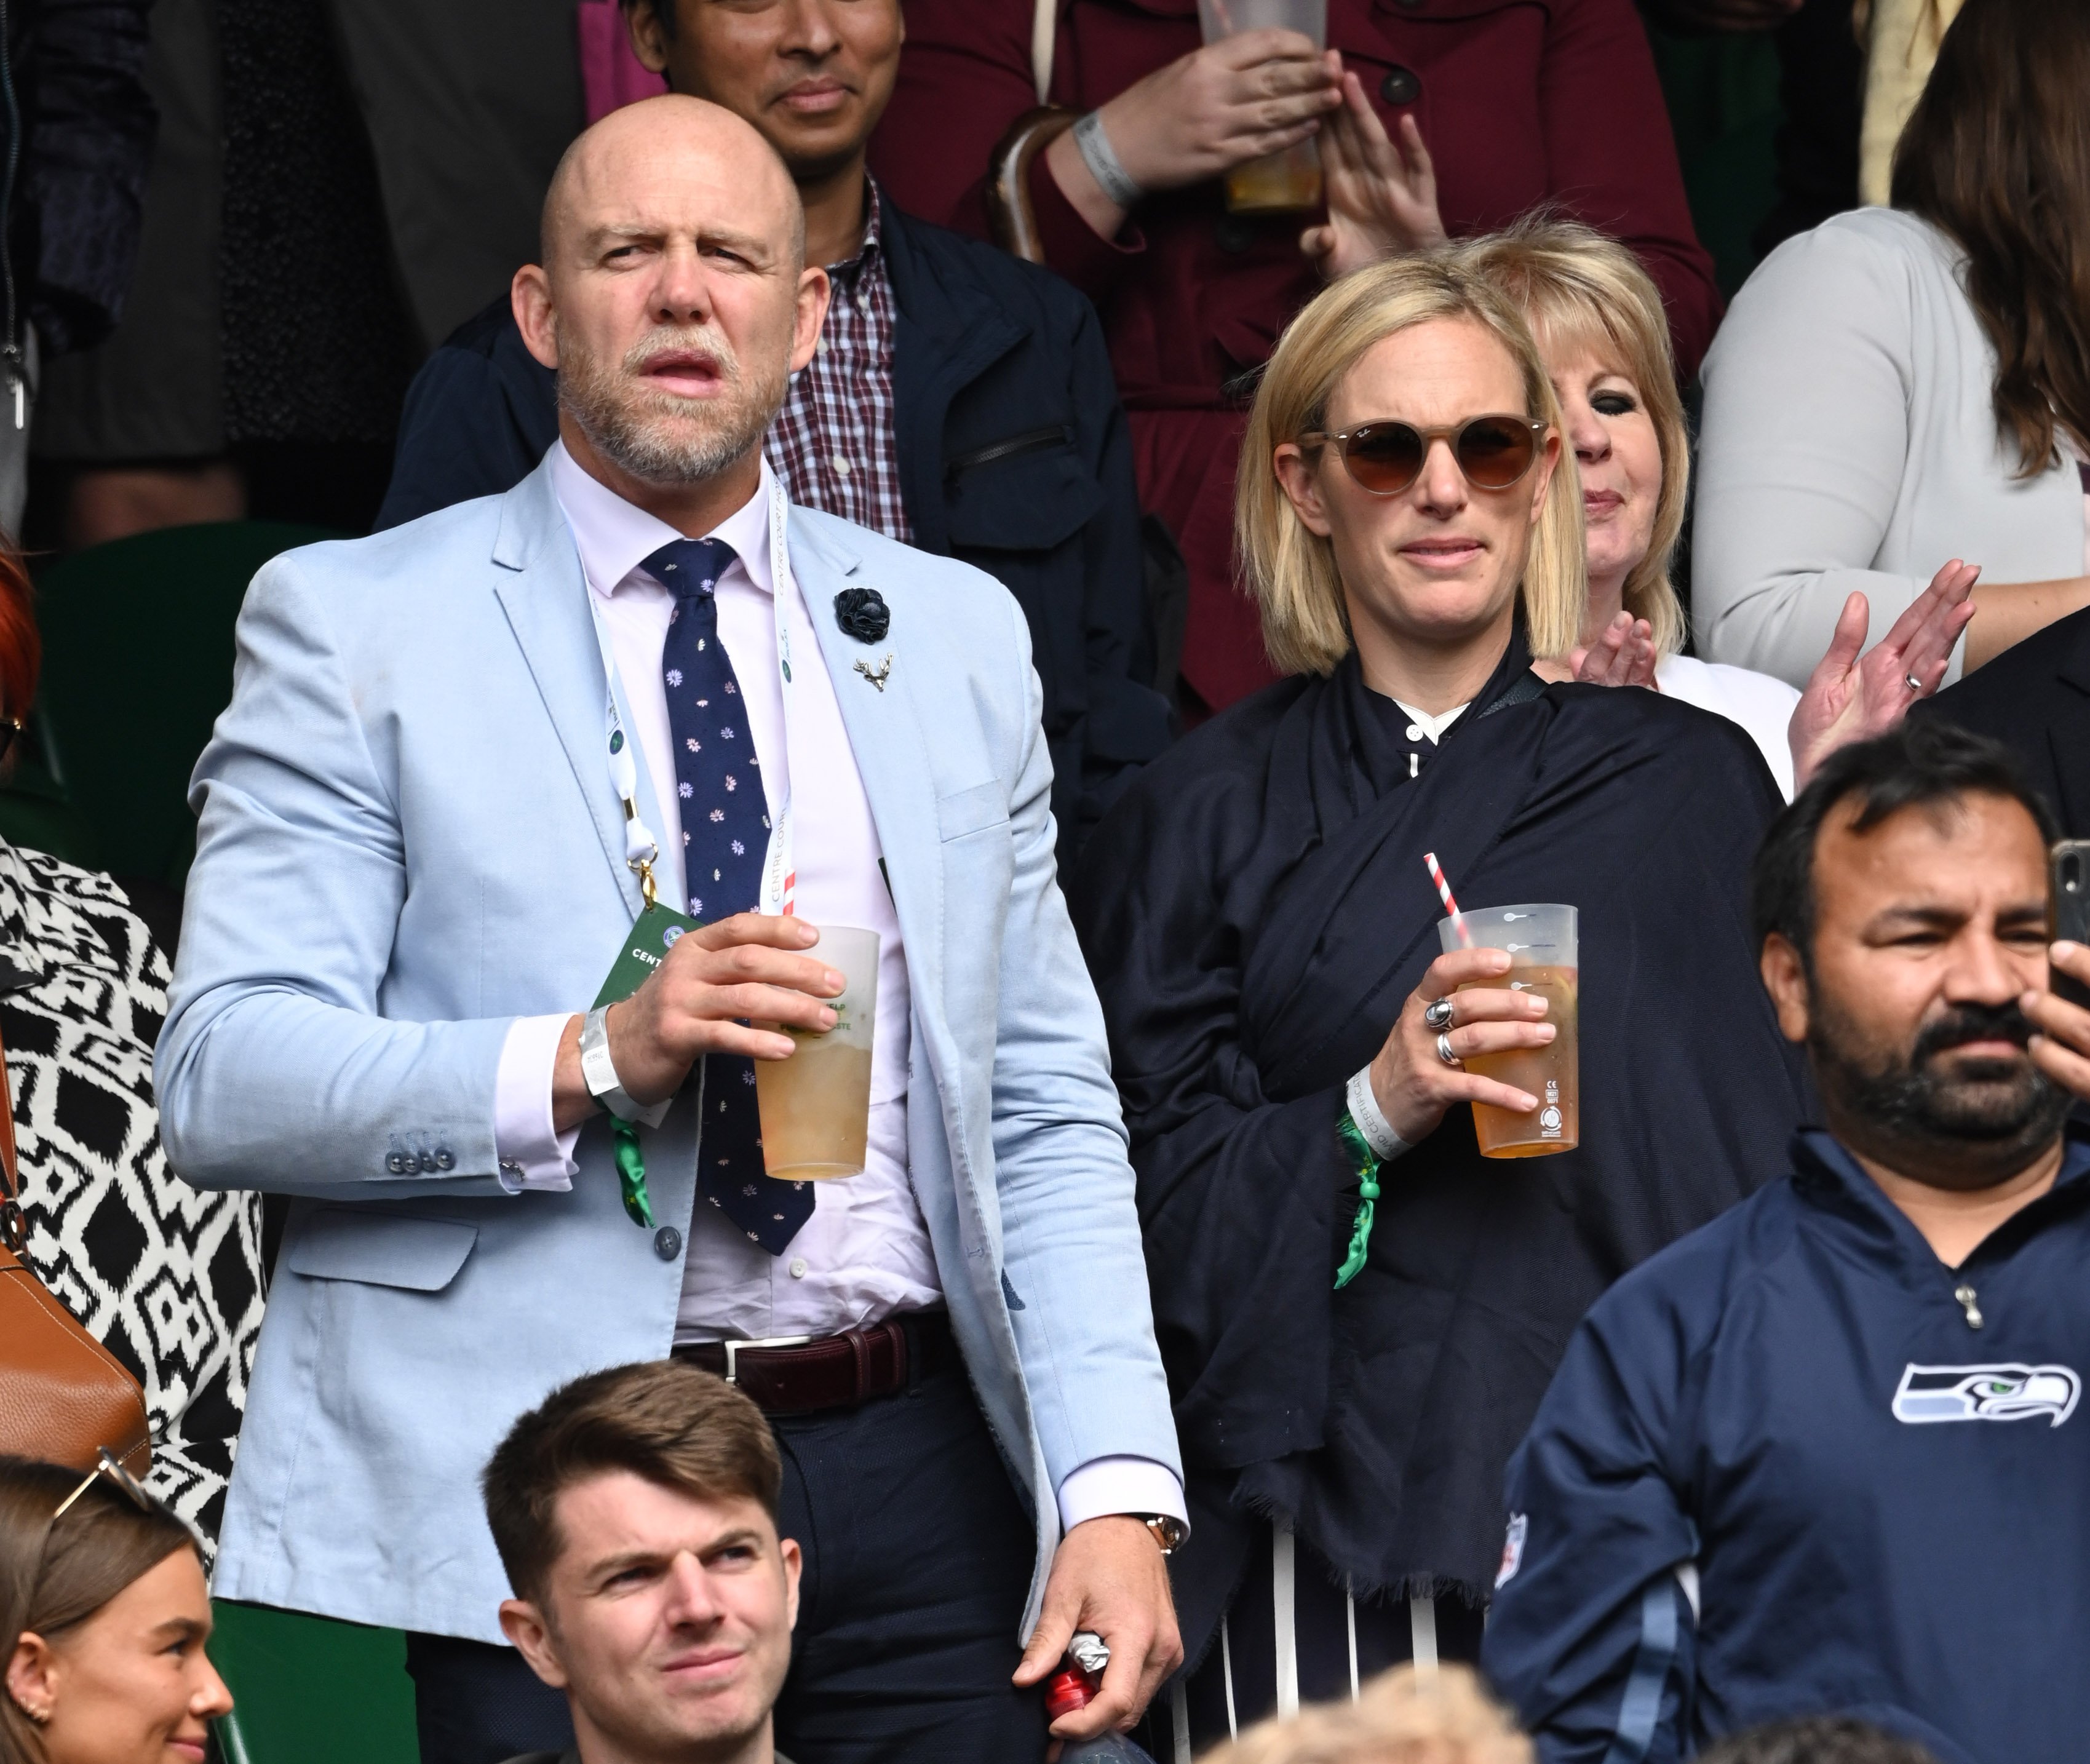 Mike Tindall and Zara Tindall in the stands at Wimbledon